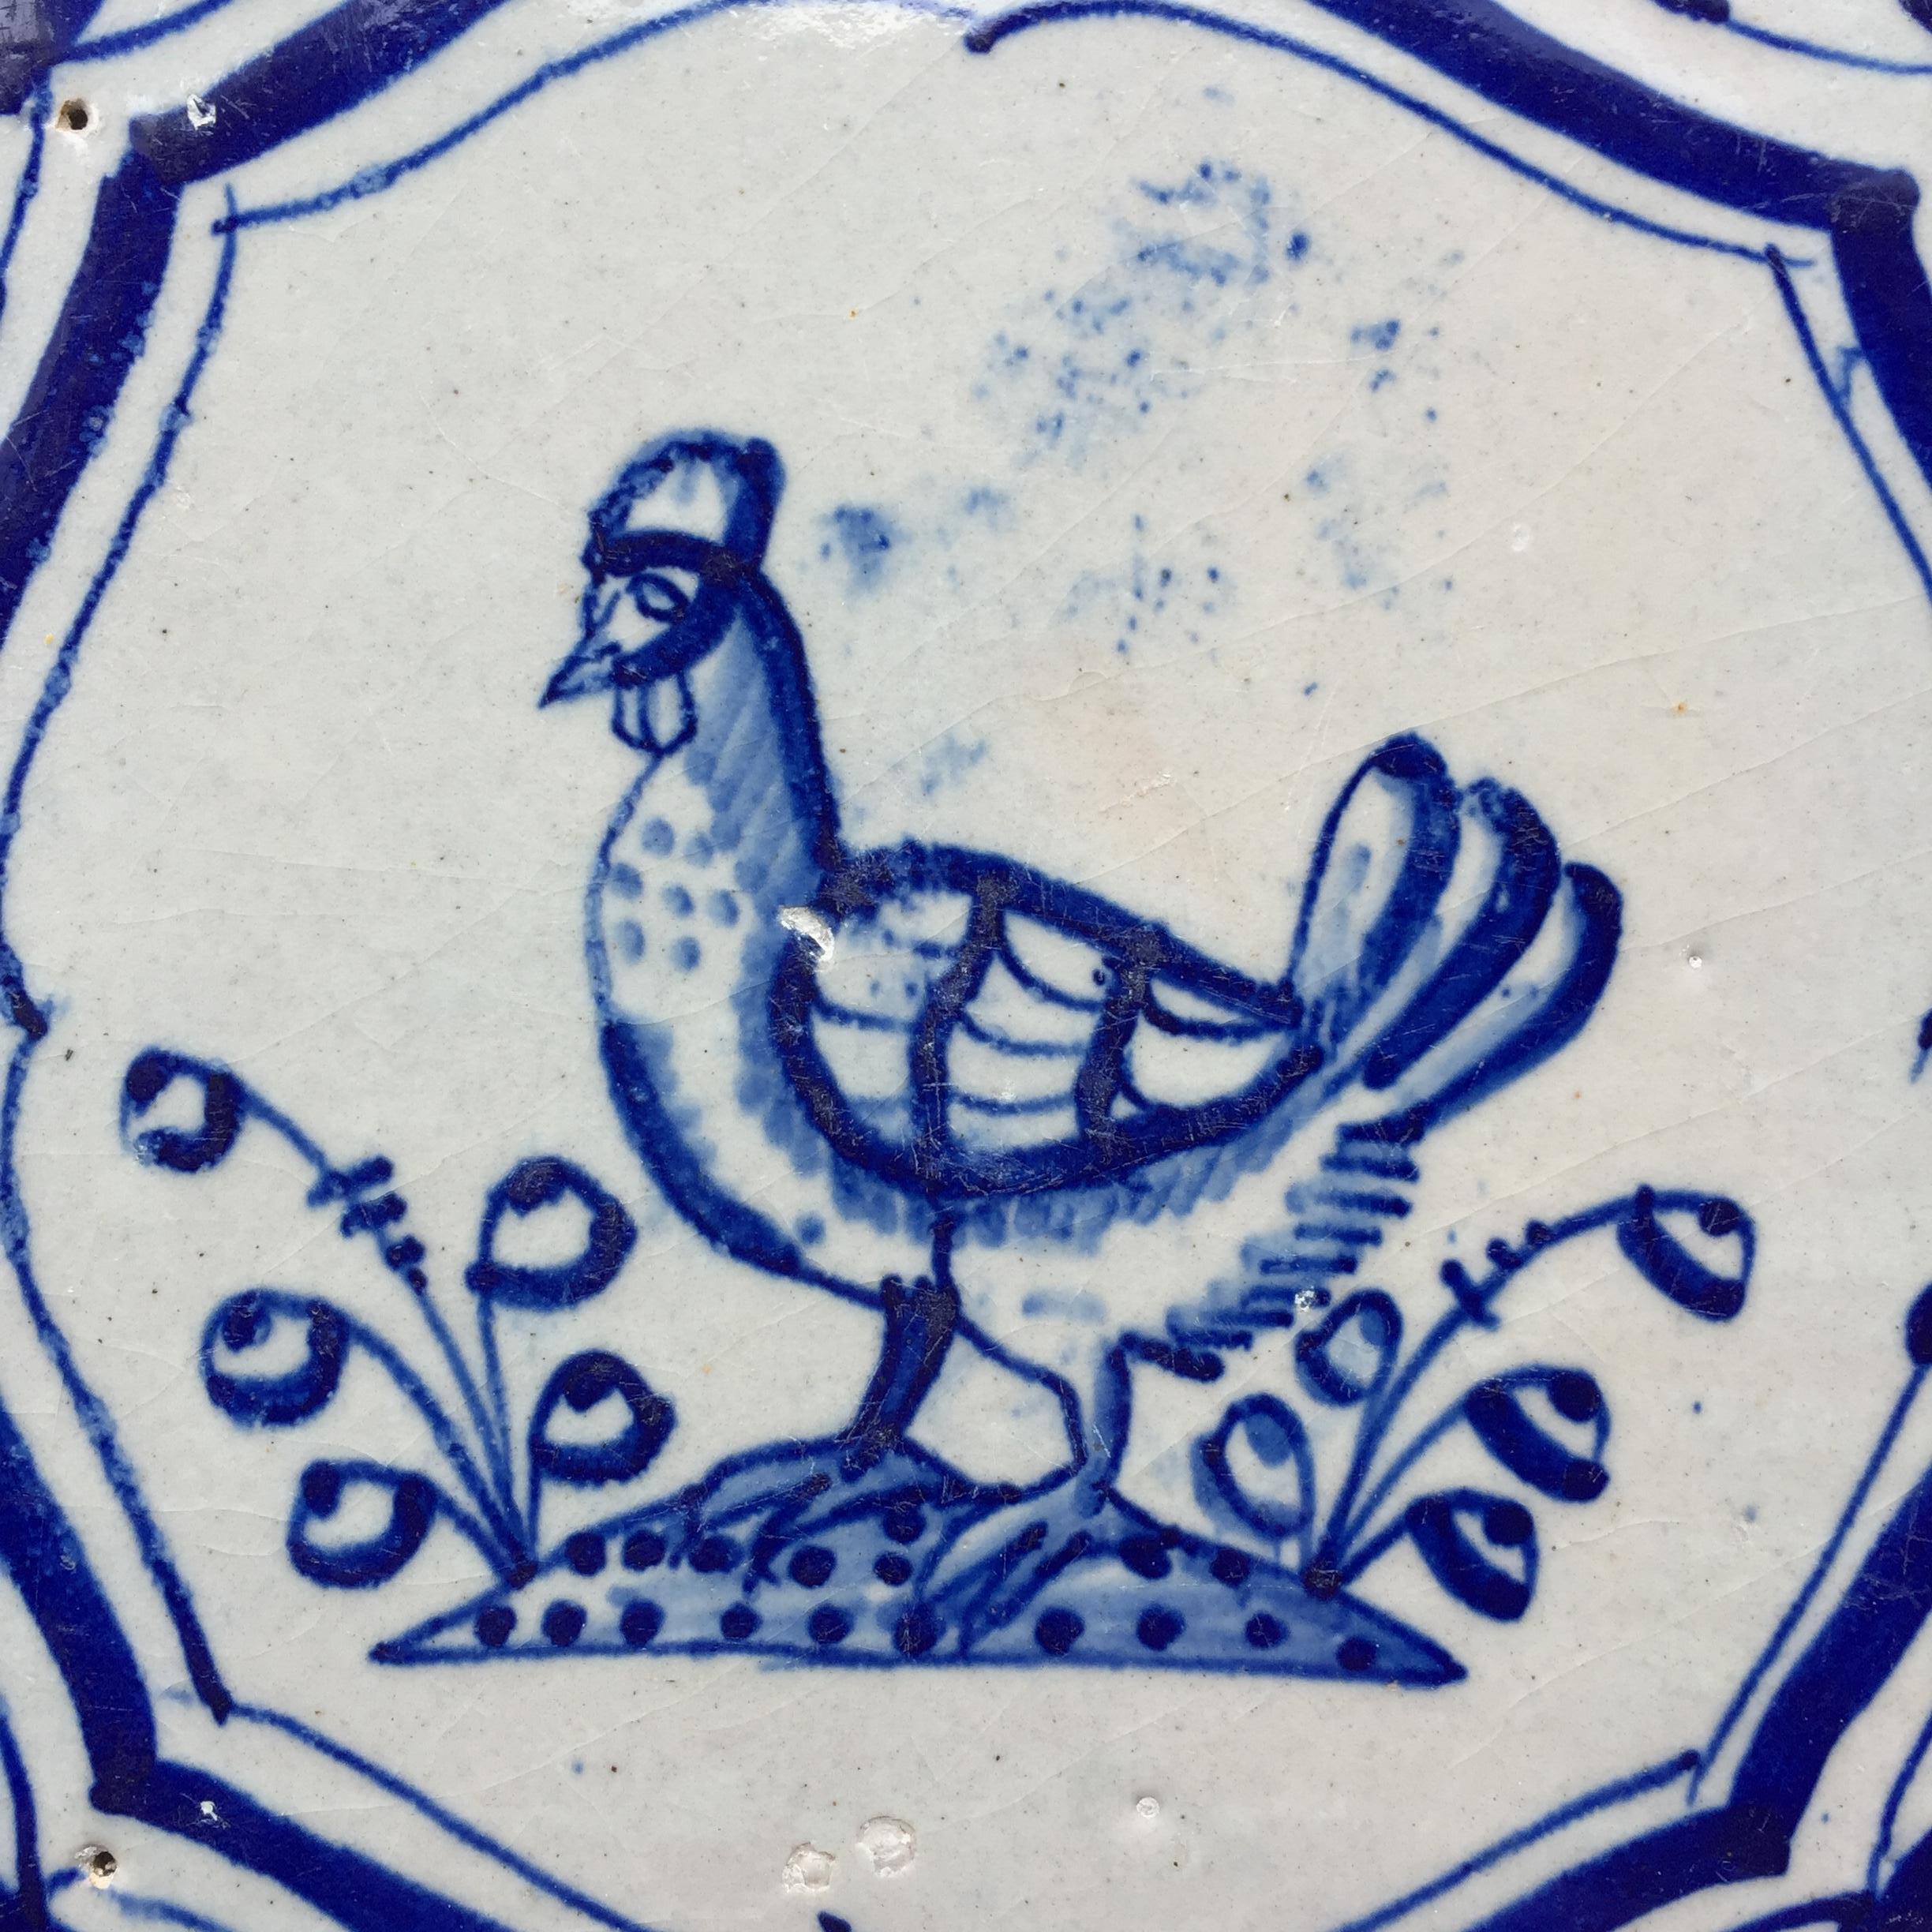 Two Rare Dutch Delft Tile with Rooster and Chicken, 17th Century 1